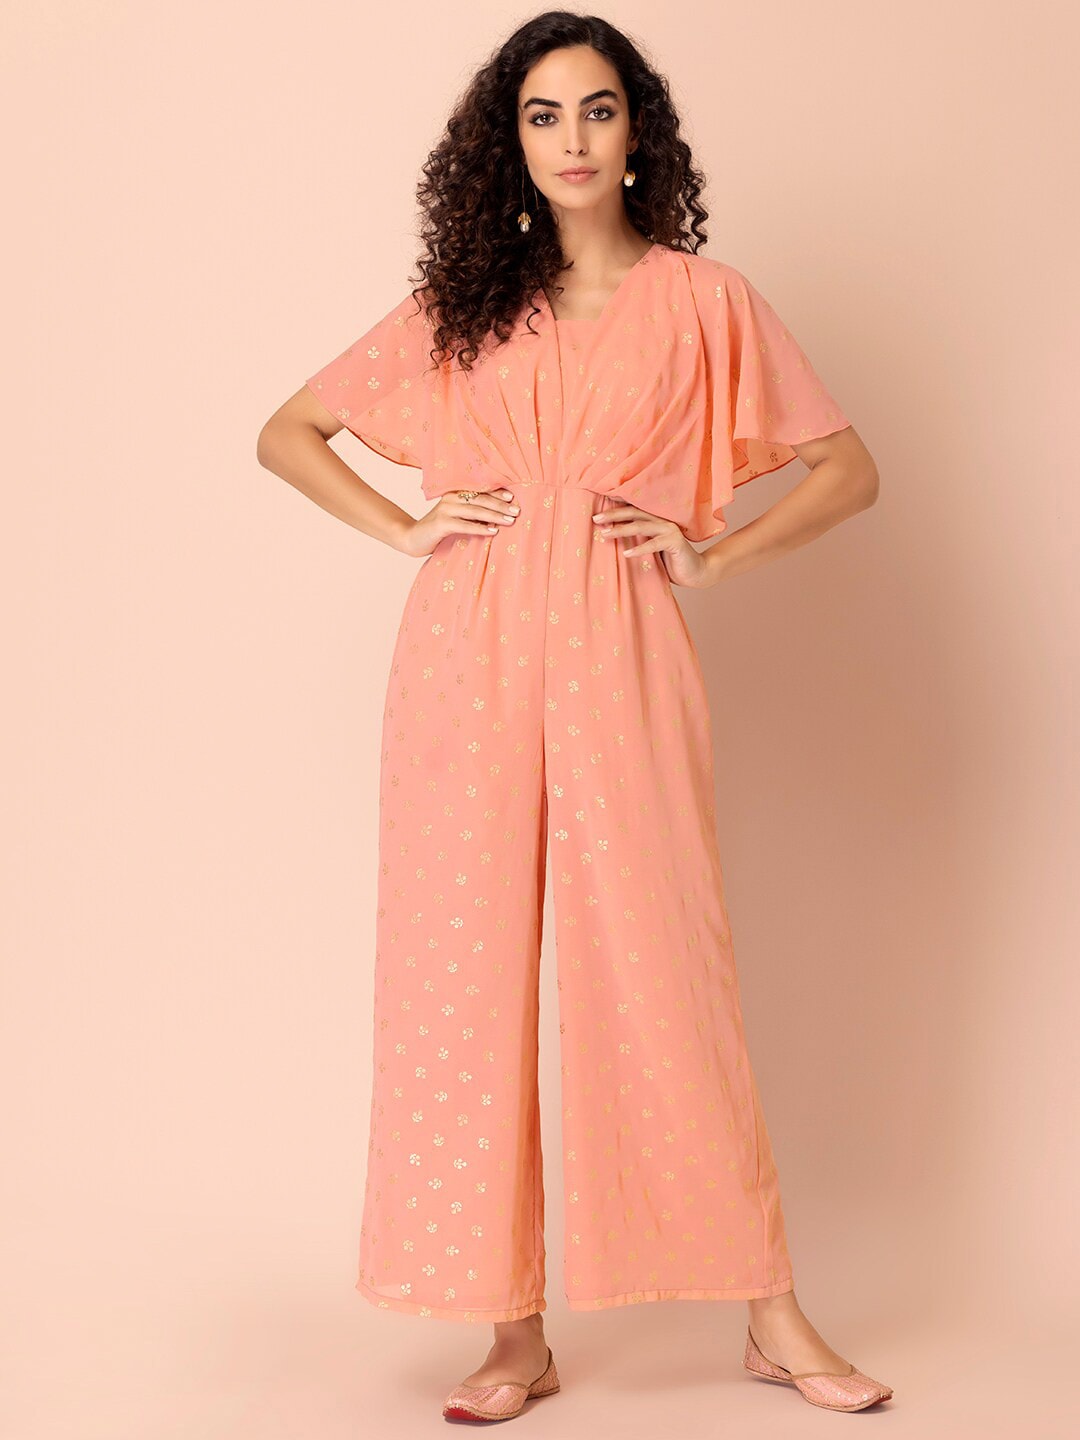 INDYA Peach-Coloured & Gold-Toned Printed Basic Jumpsuit Price in India